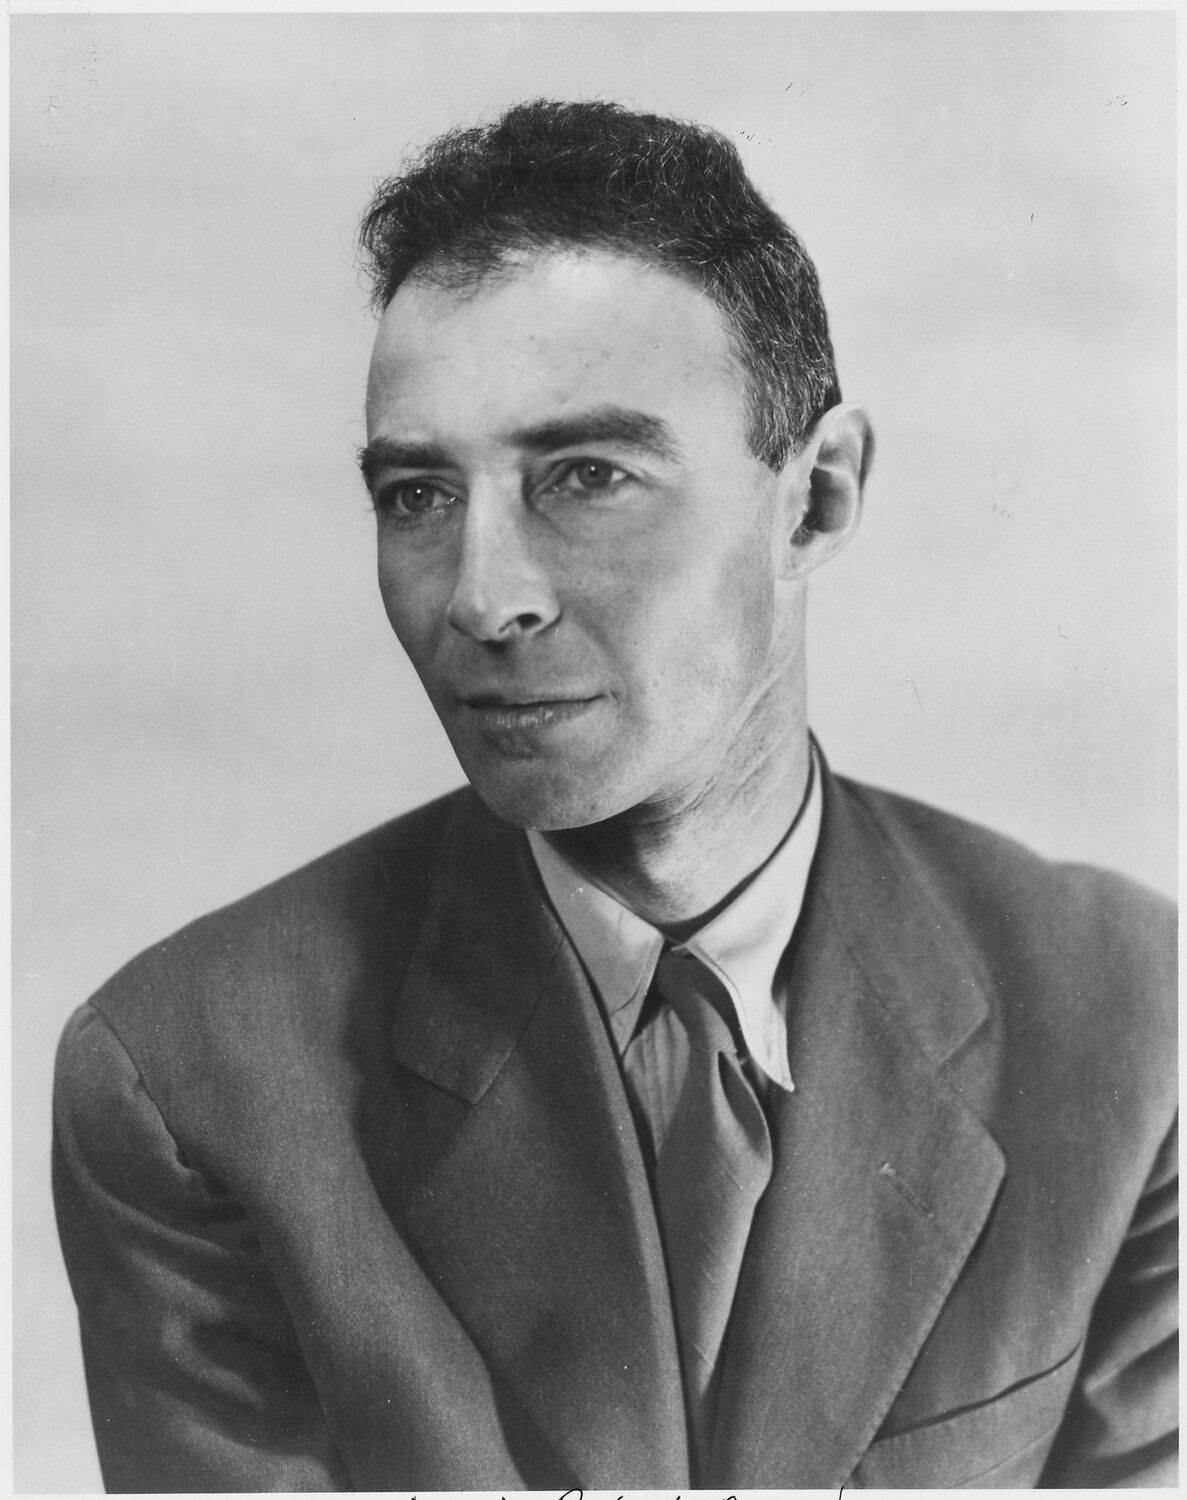 Dr. J. Robert Oppenheimer, atomic physicist and head of the Manhattan Project, poses in 1944.